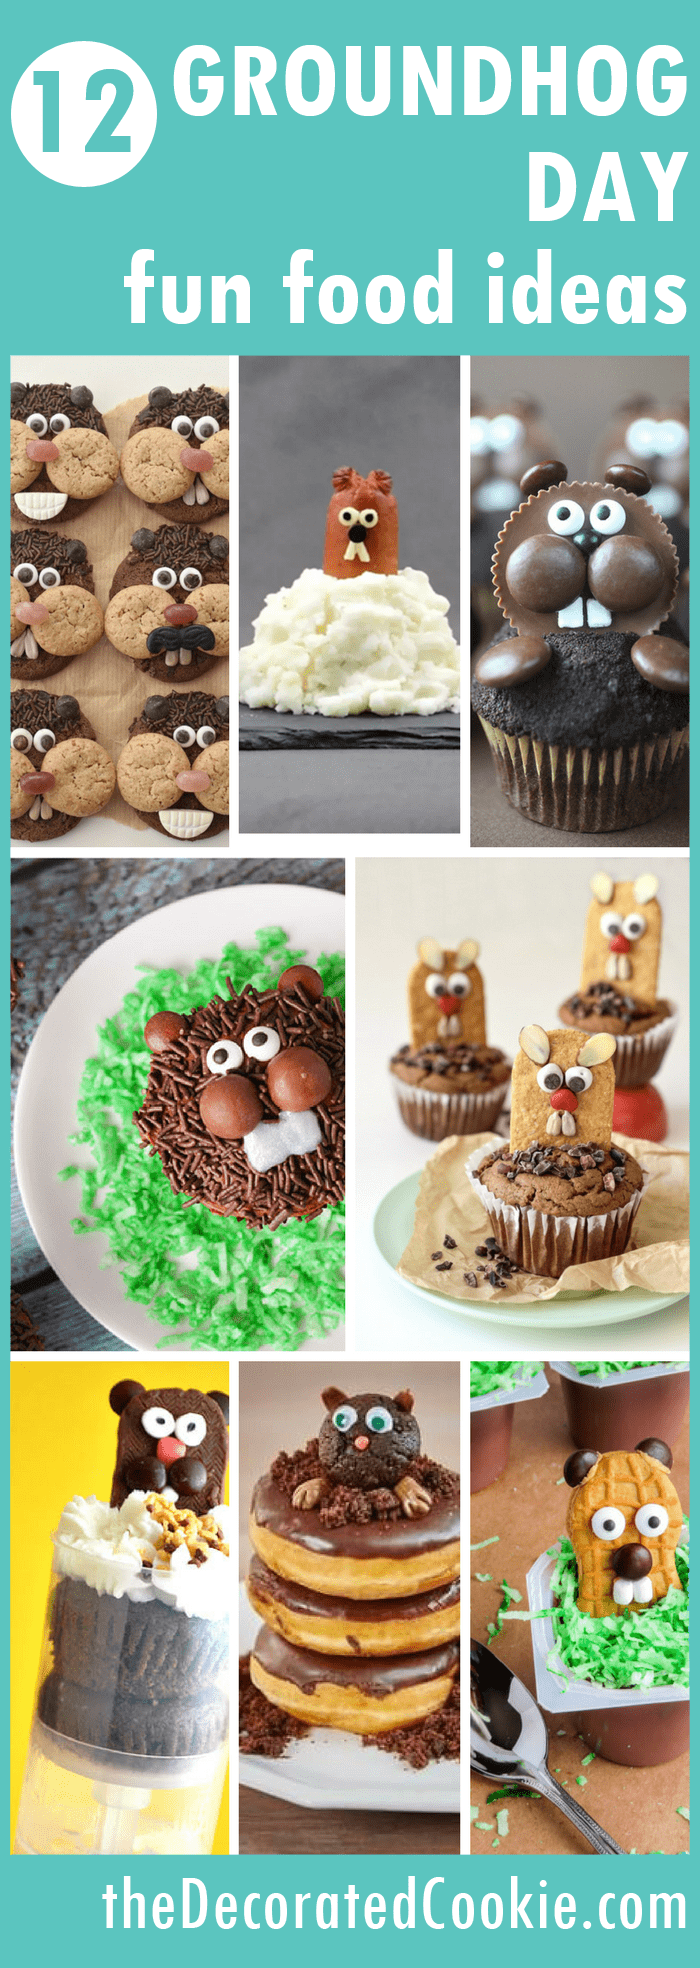 A roundup of 12 Groundhog Day fun food ideas to celebrate with kids. Great ideas for holiday classroom treats.